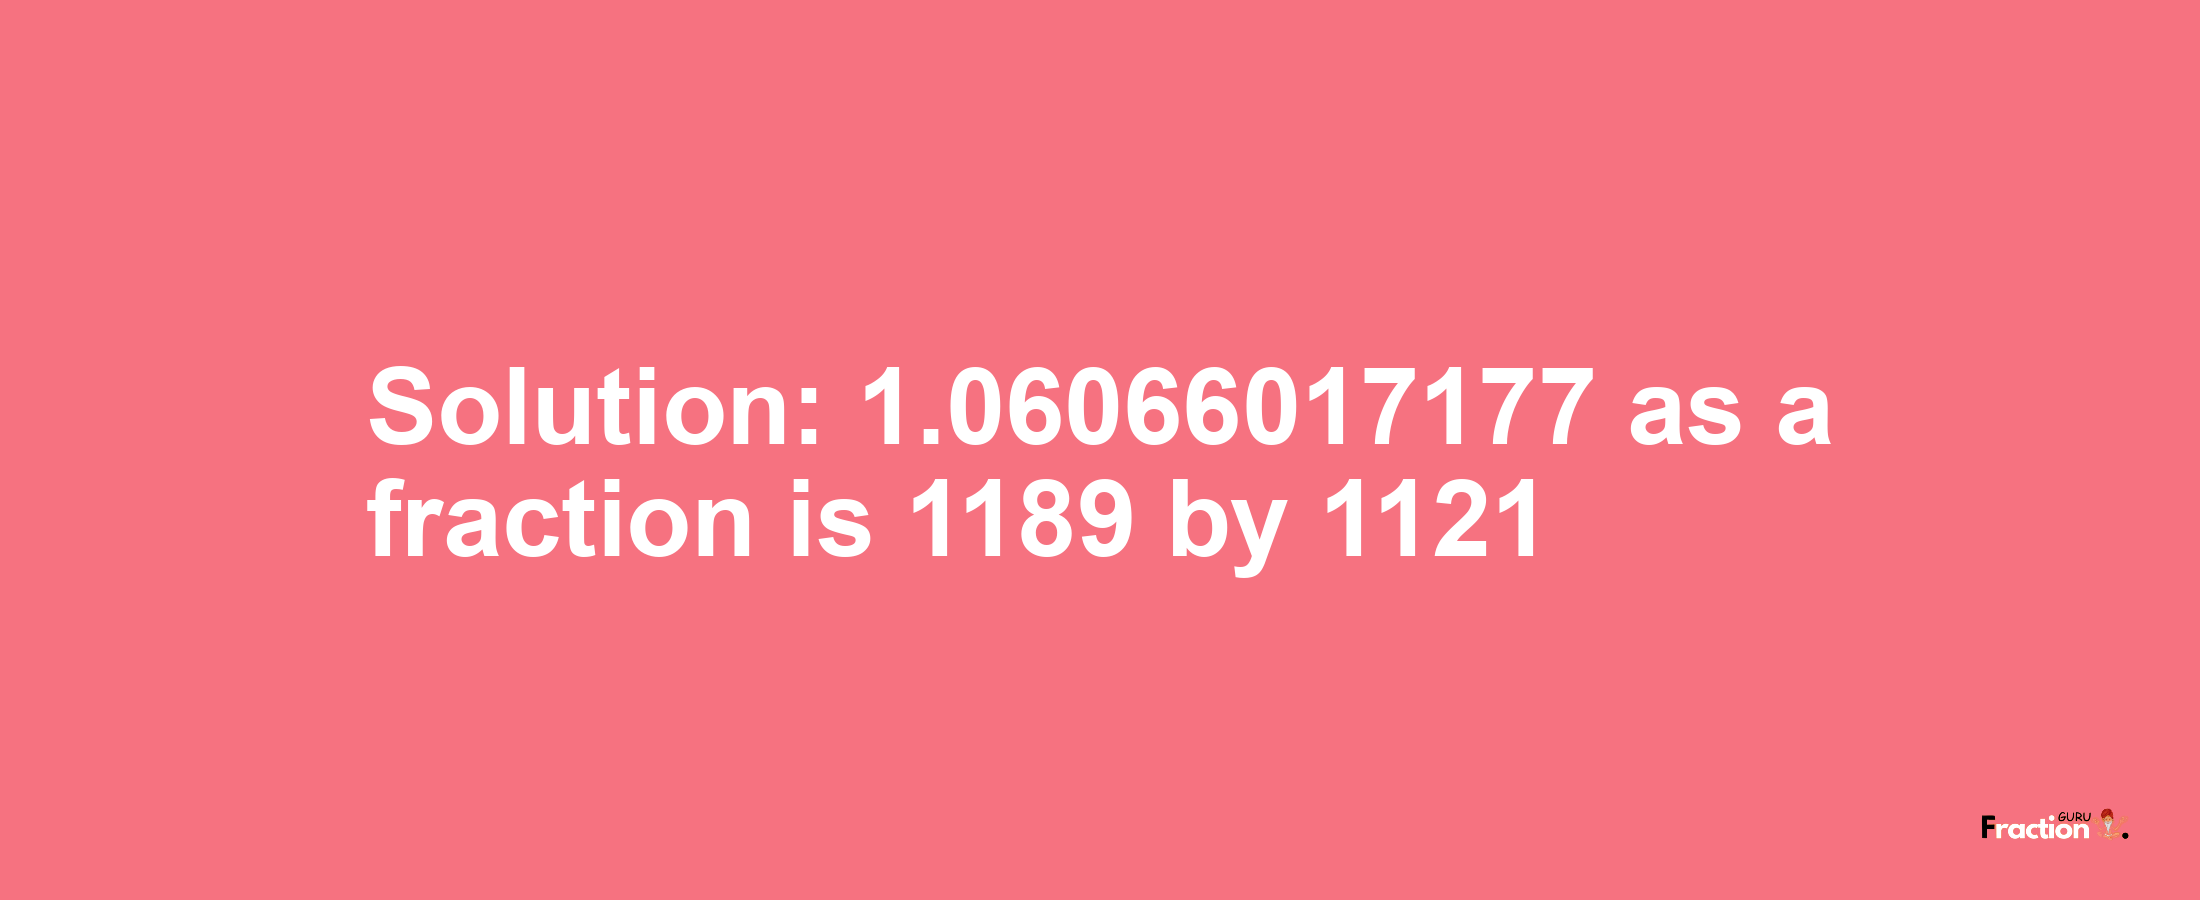 Solution:1.06066017177 as a fraction is 1189/1121